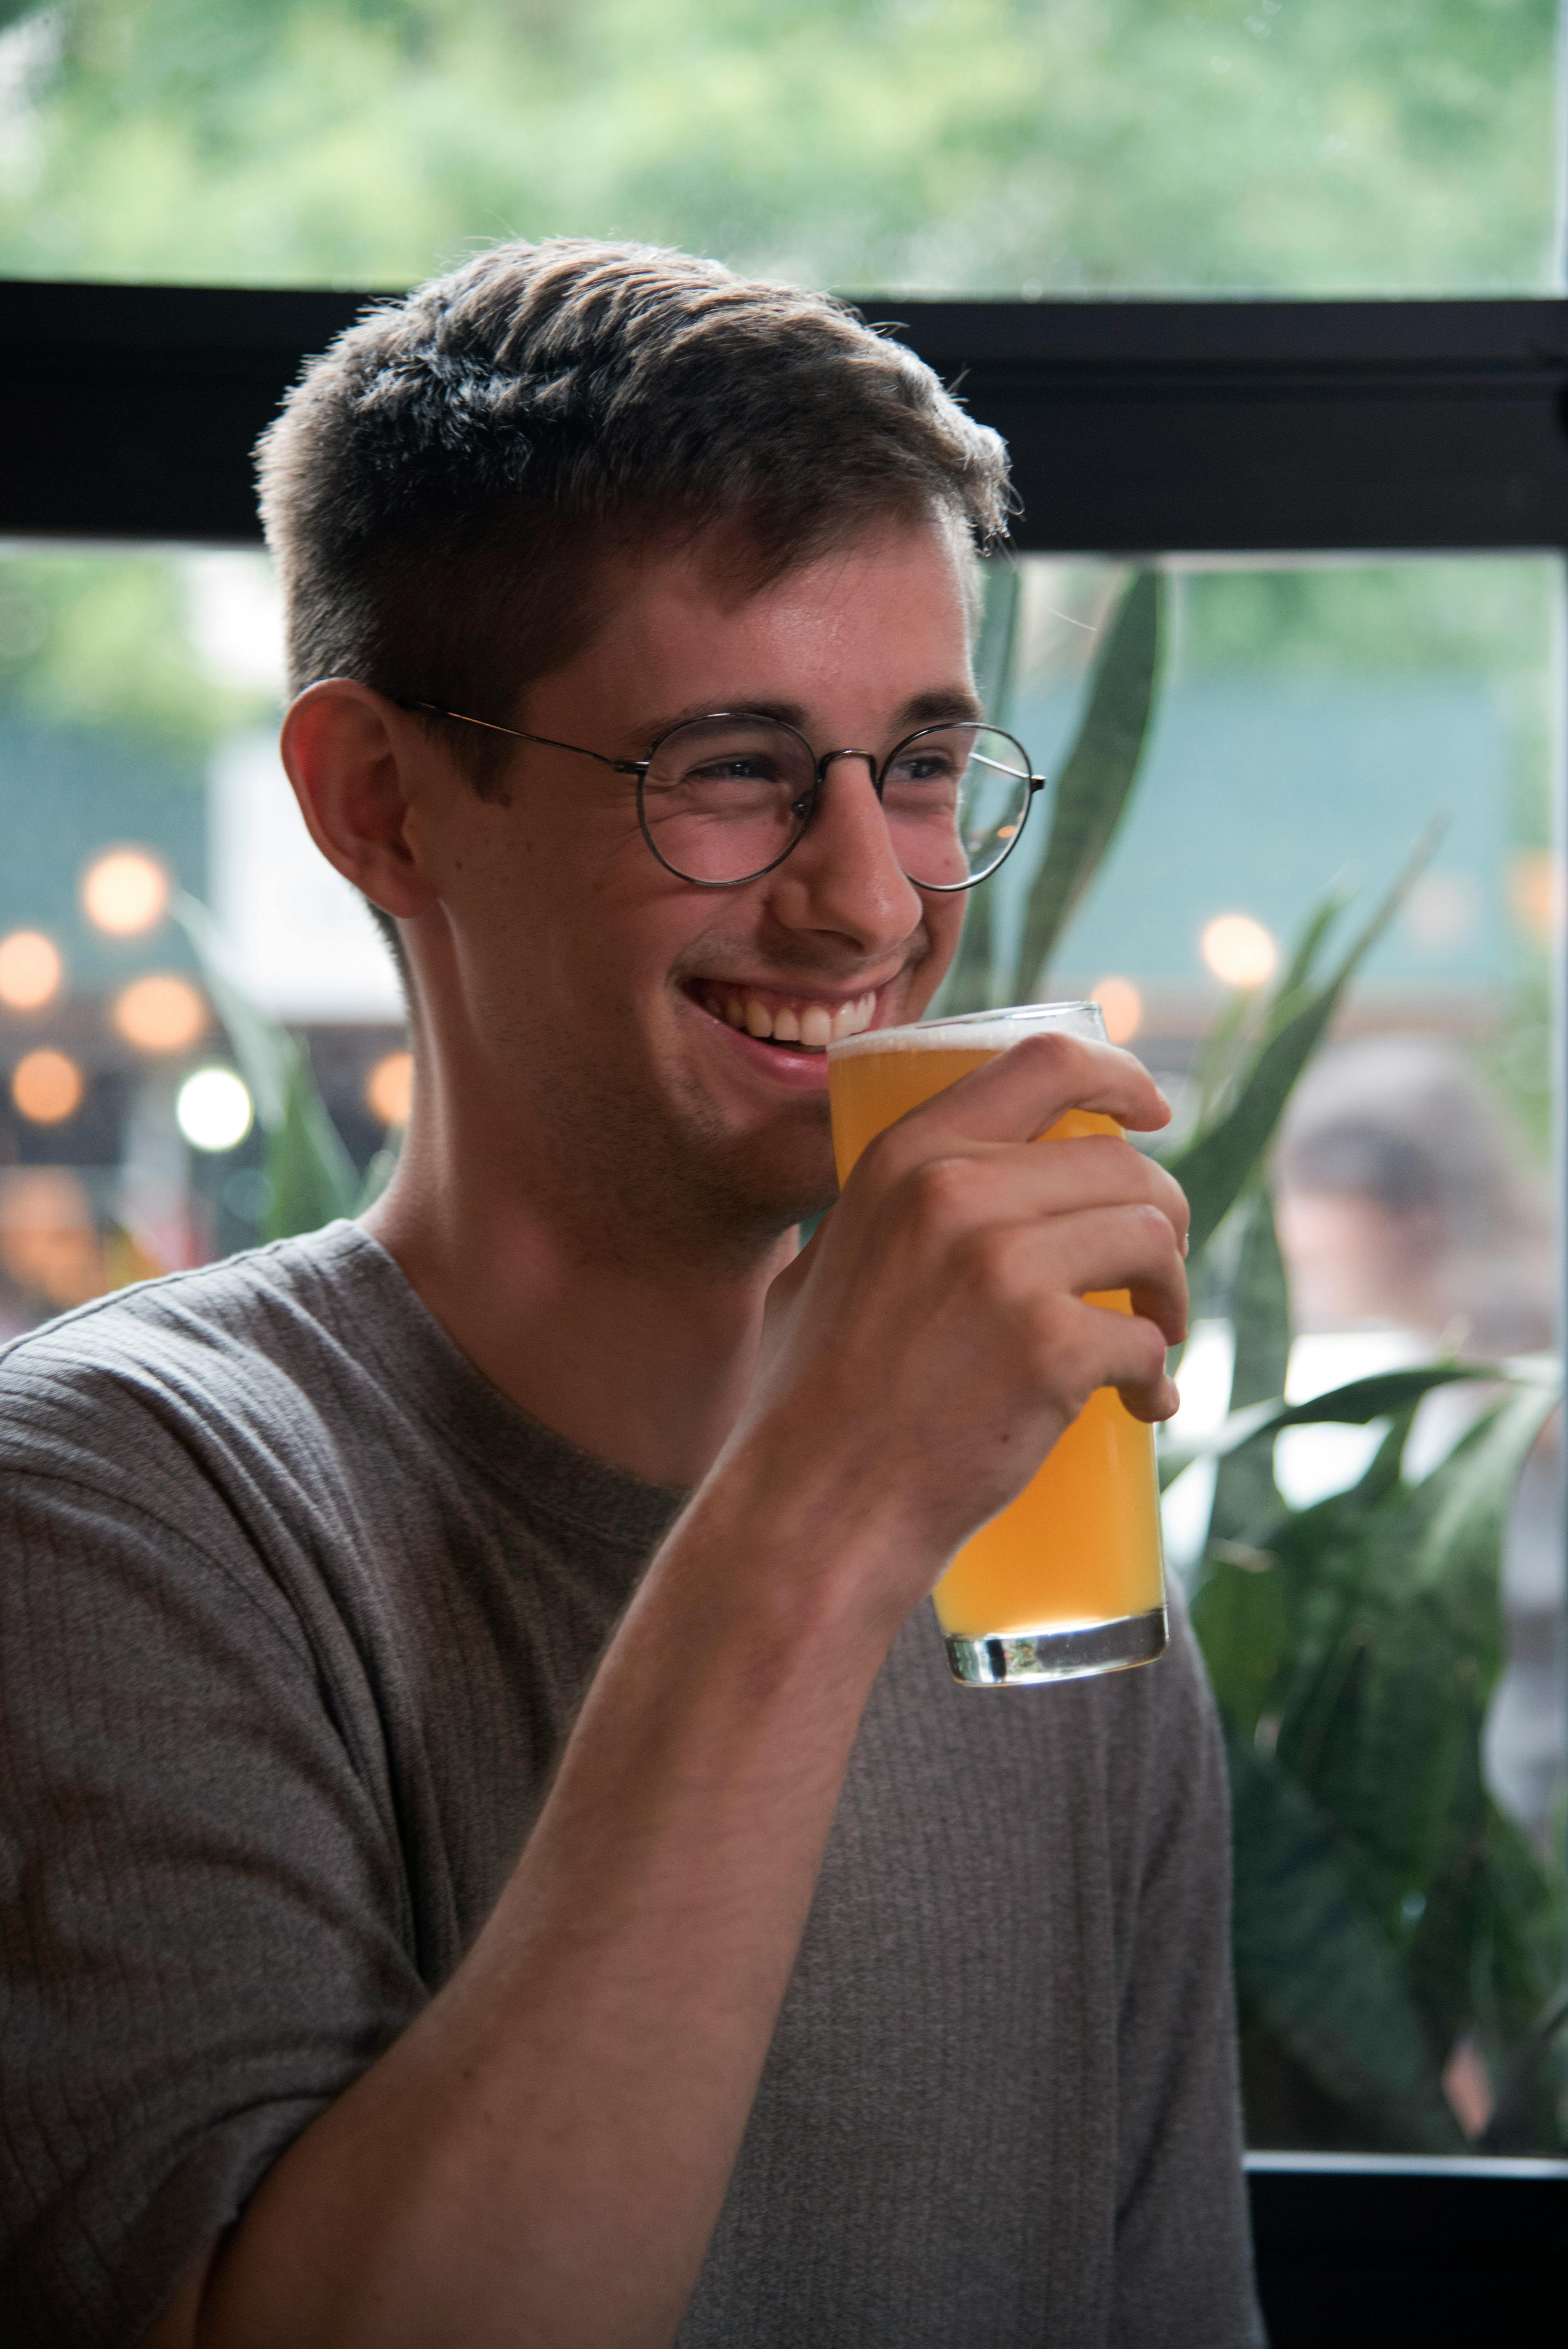 A man having a beverage while laughing | Source: Pexels